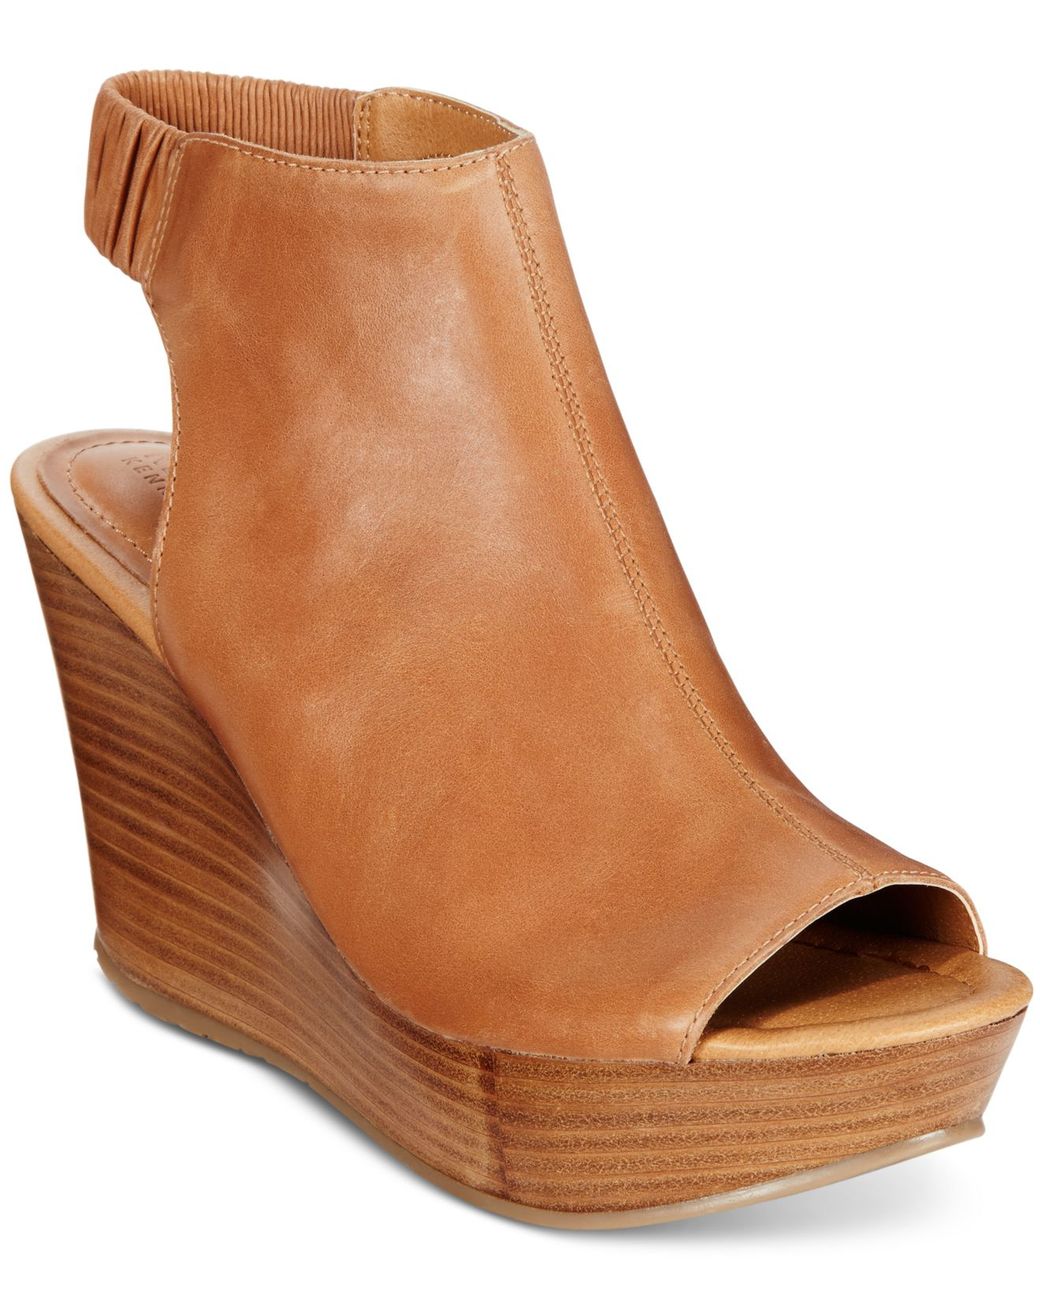 Kenneth Cole Reaction Sole Chick Platform Wedge Sandals in Brown | Lyst